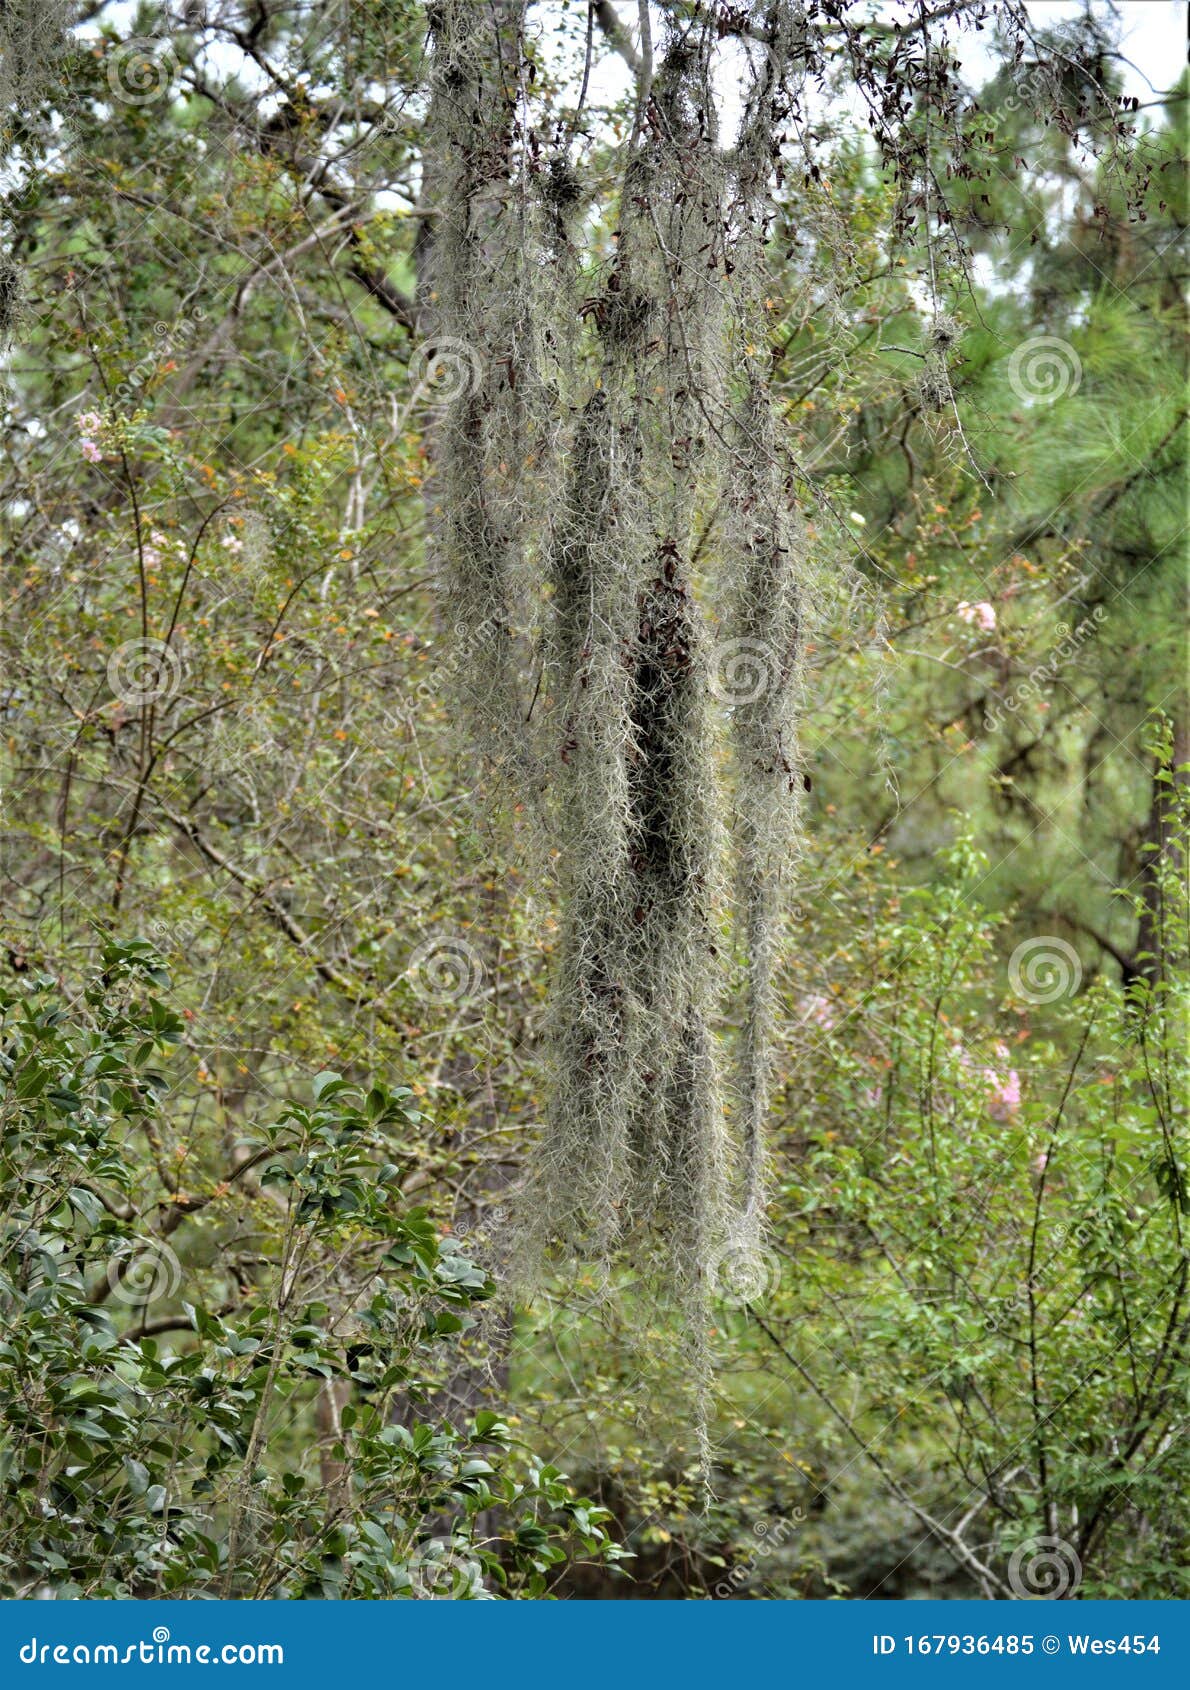 Long Strands of Moss Hanging from the Tree Stock Image - Image of trees,  groups: 167936485